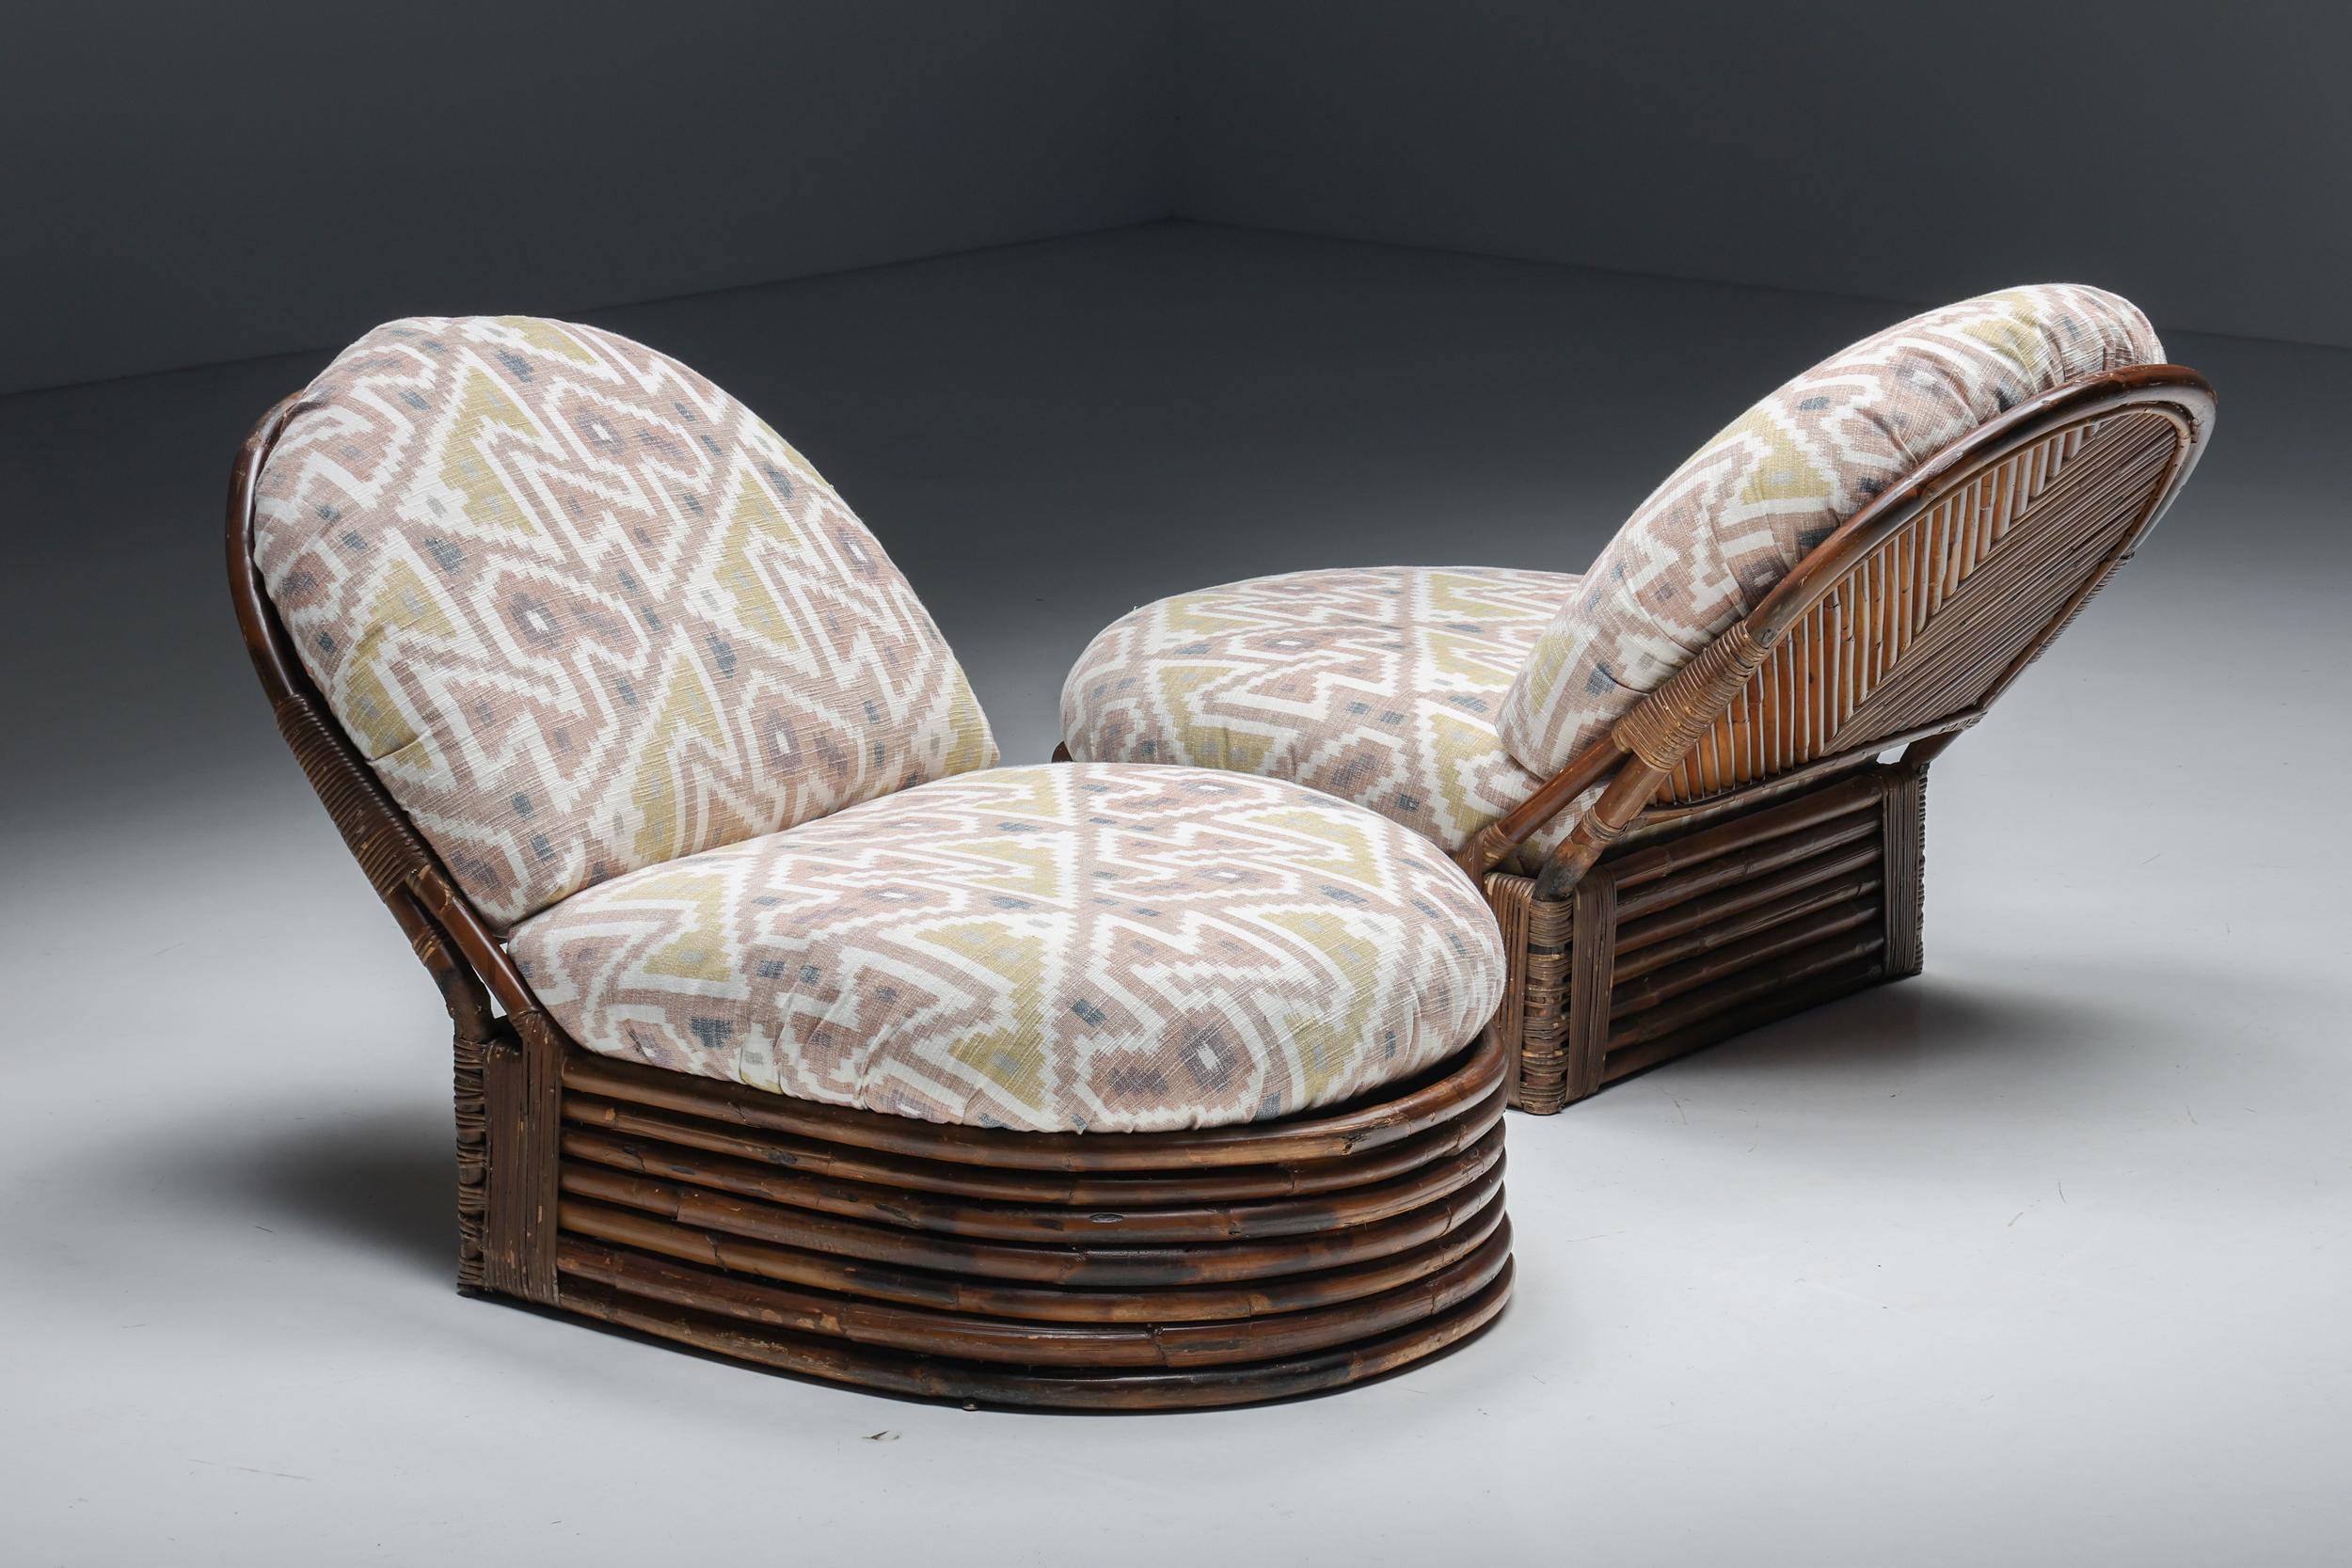 Italian Vivai Del Sud Bamboo Lounge Chairs, Pierre Frey Jacquard, 1970s For Sale